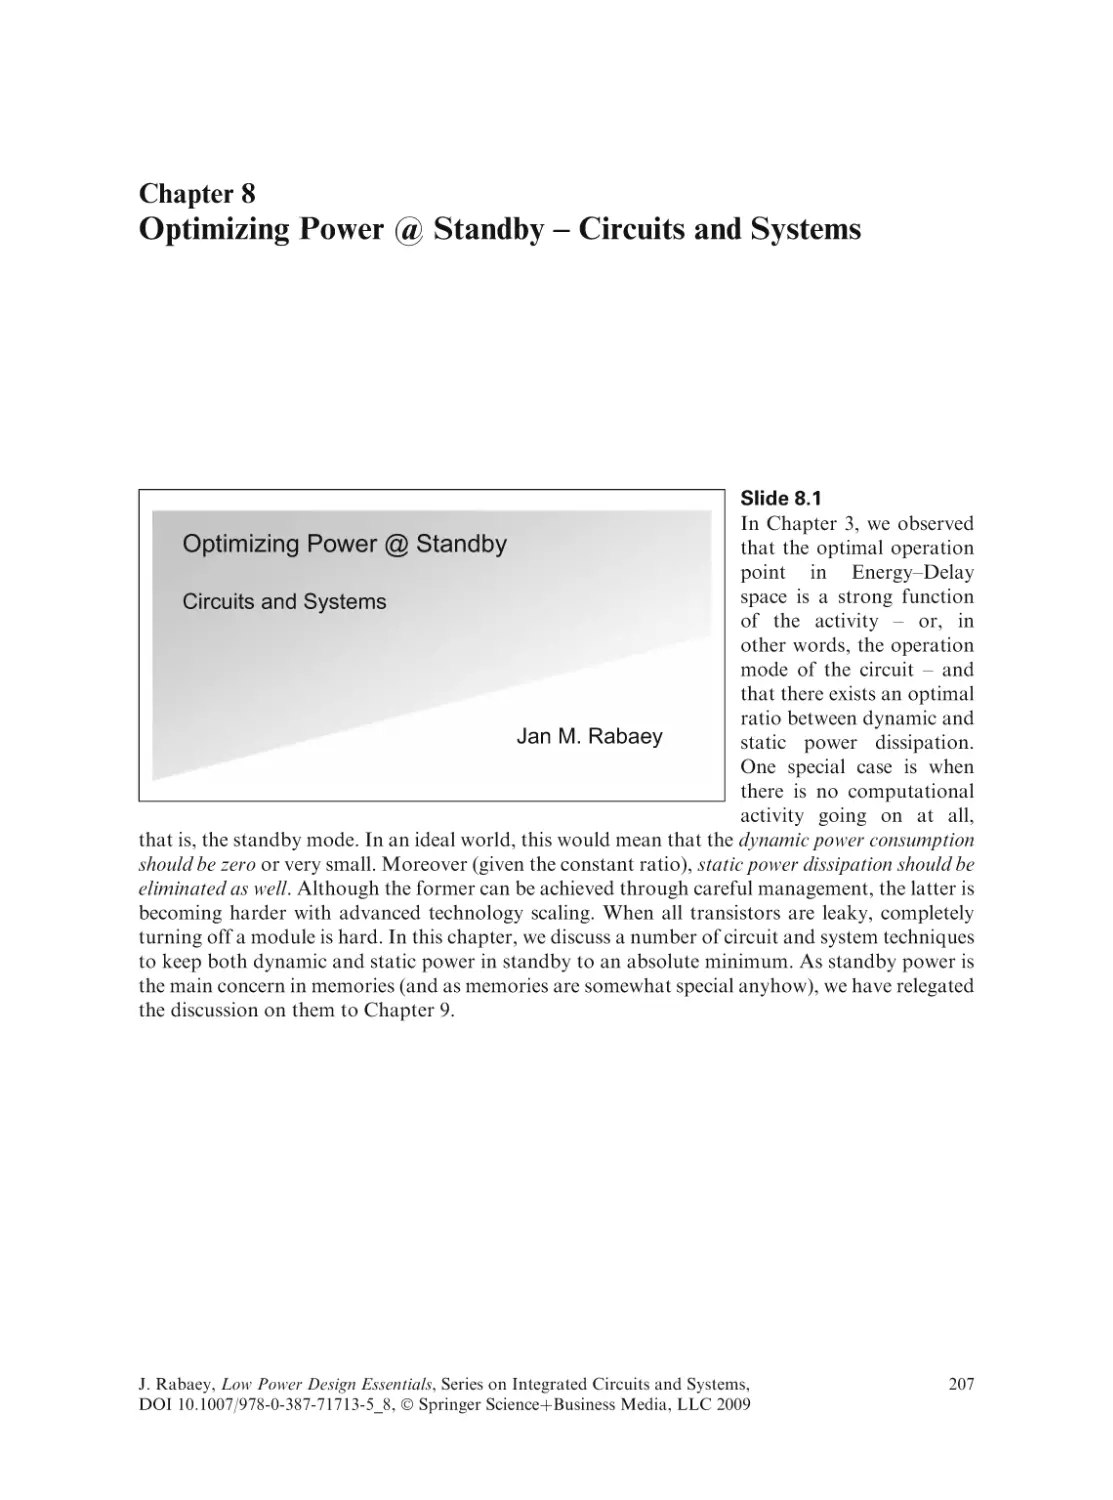 Optimizing Power @ Standby - Circuits and Systems
Slide 8.1